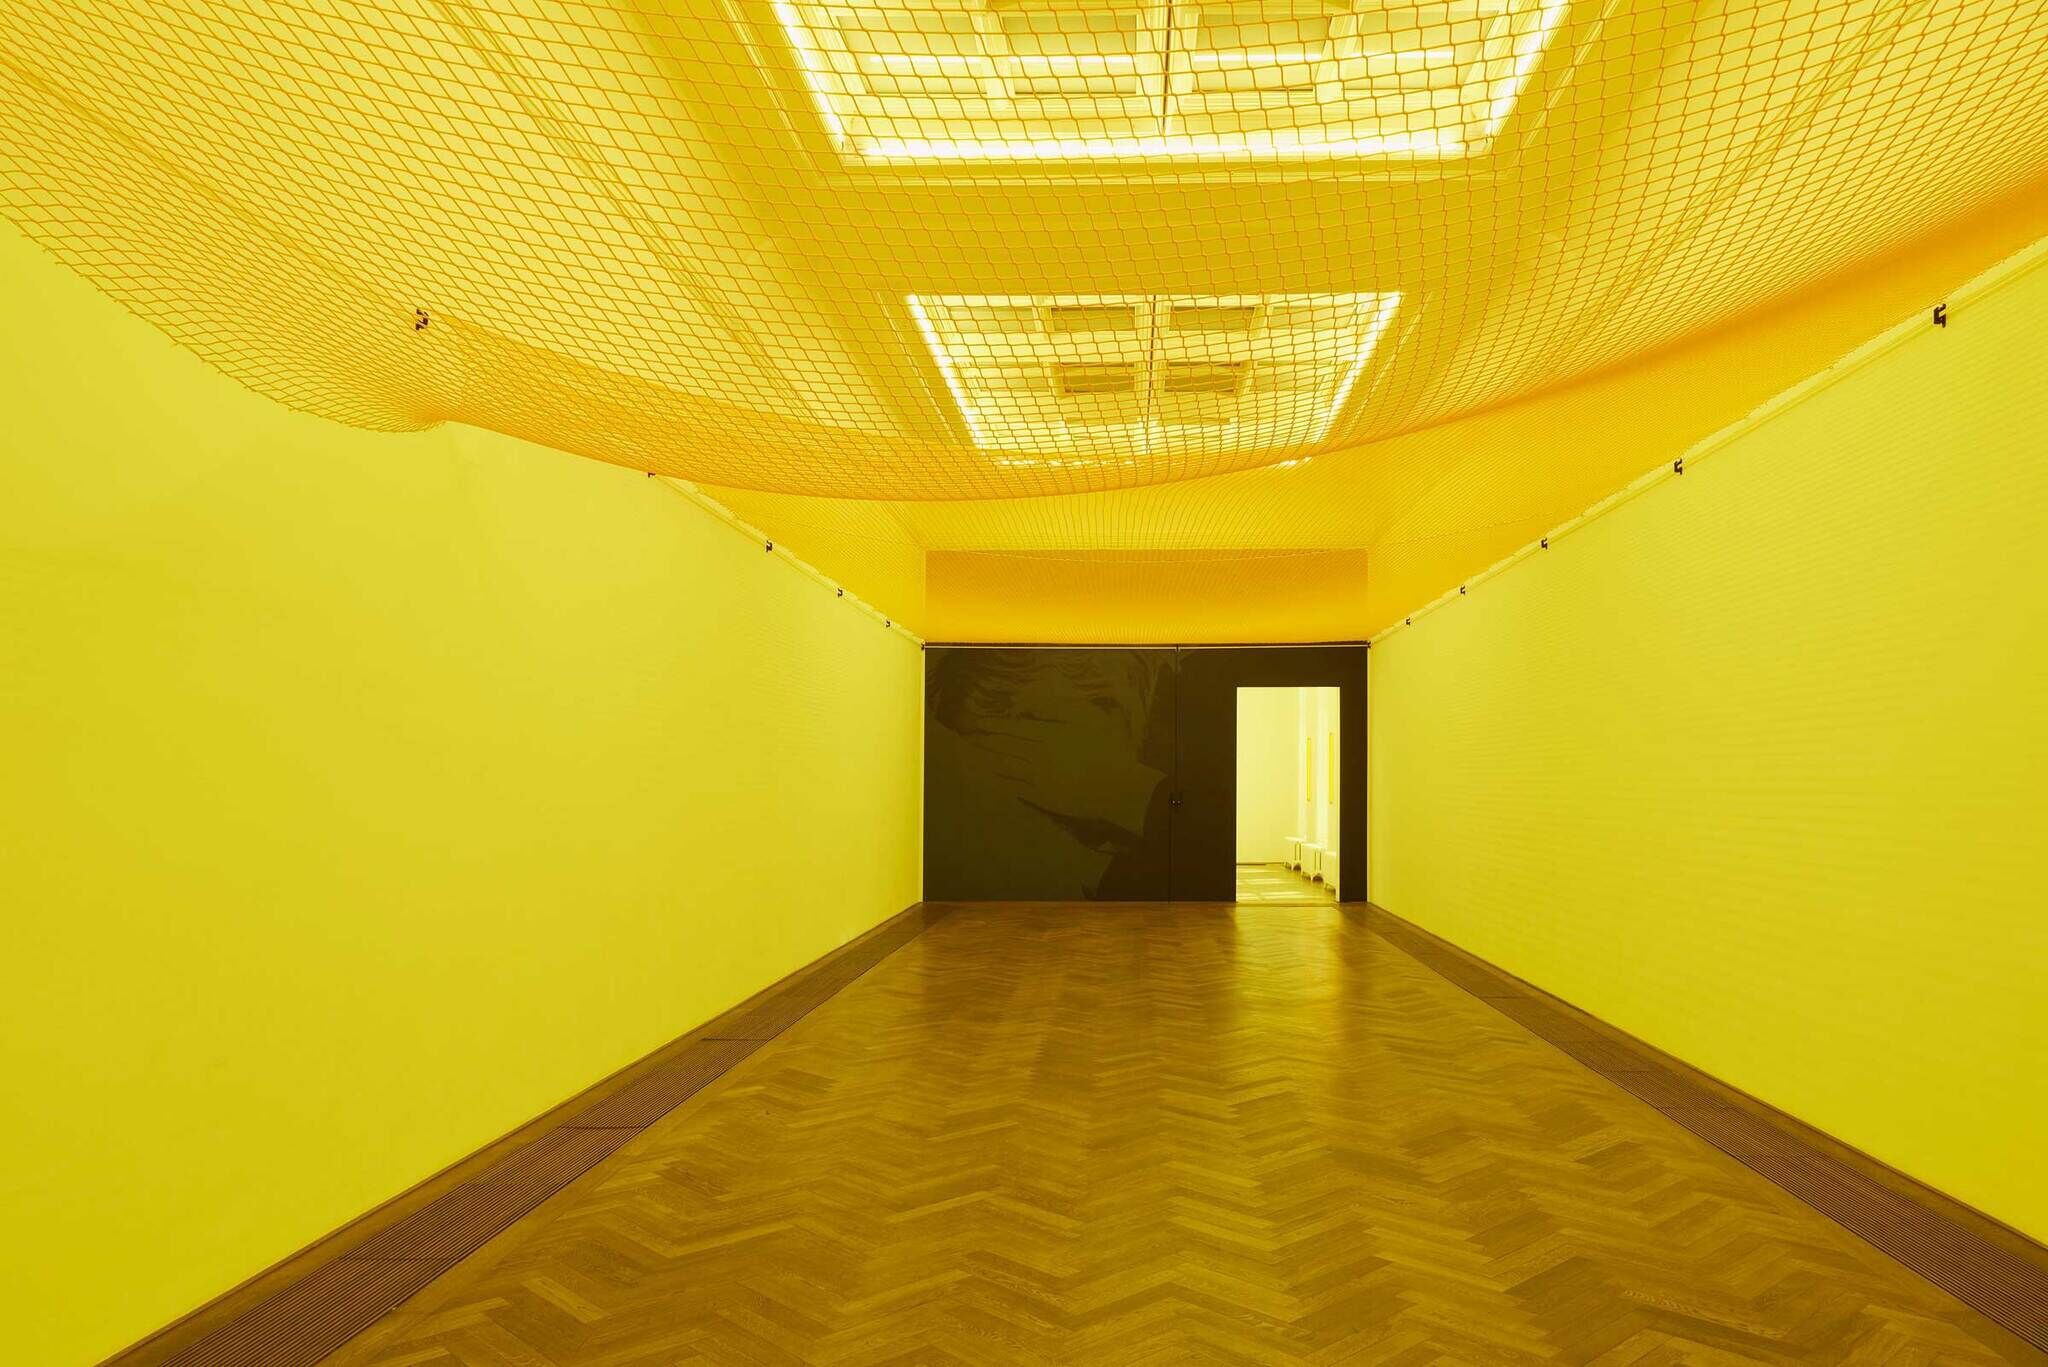 A room with yellow walls and ceiling, a net hanging below white lights, and a herringbone wood floor leading to an open door.